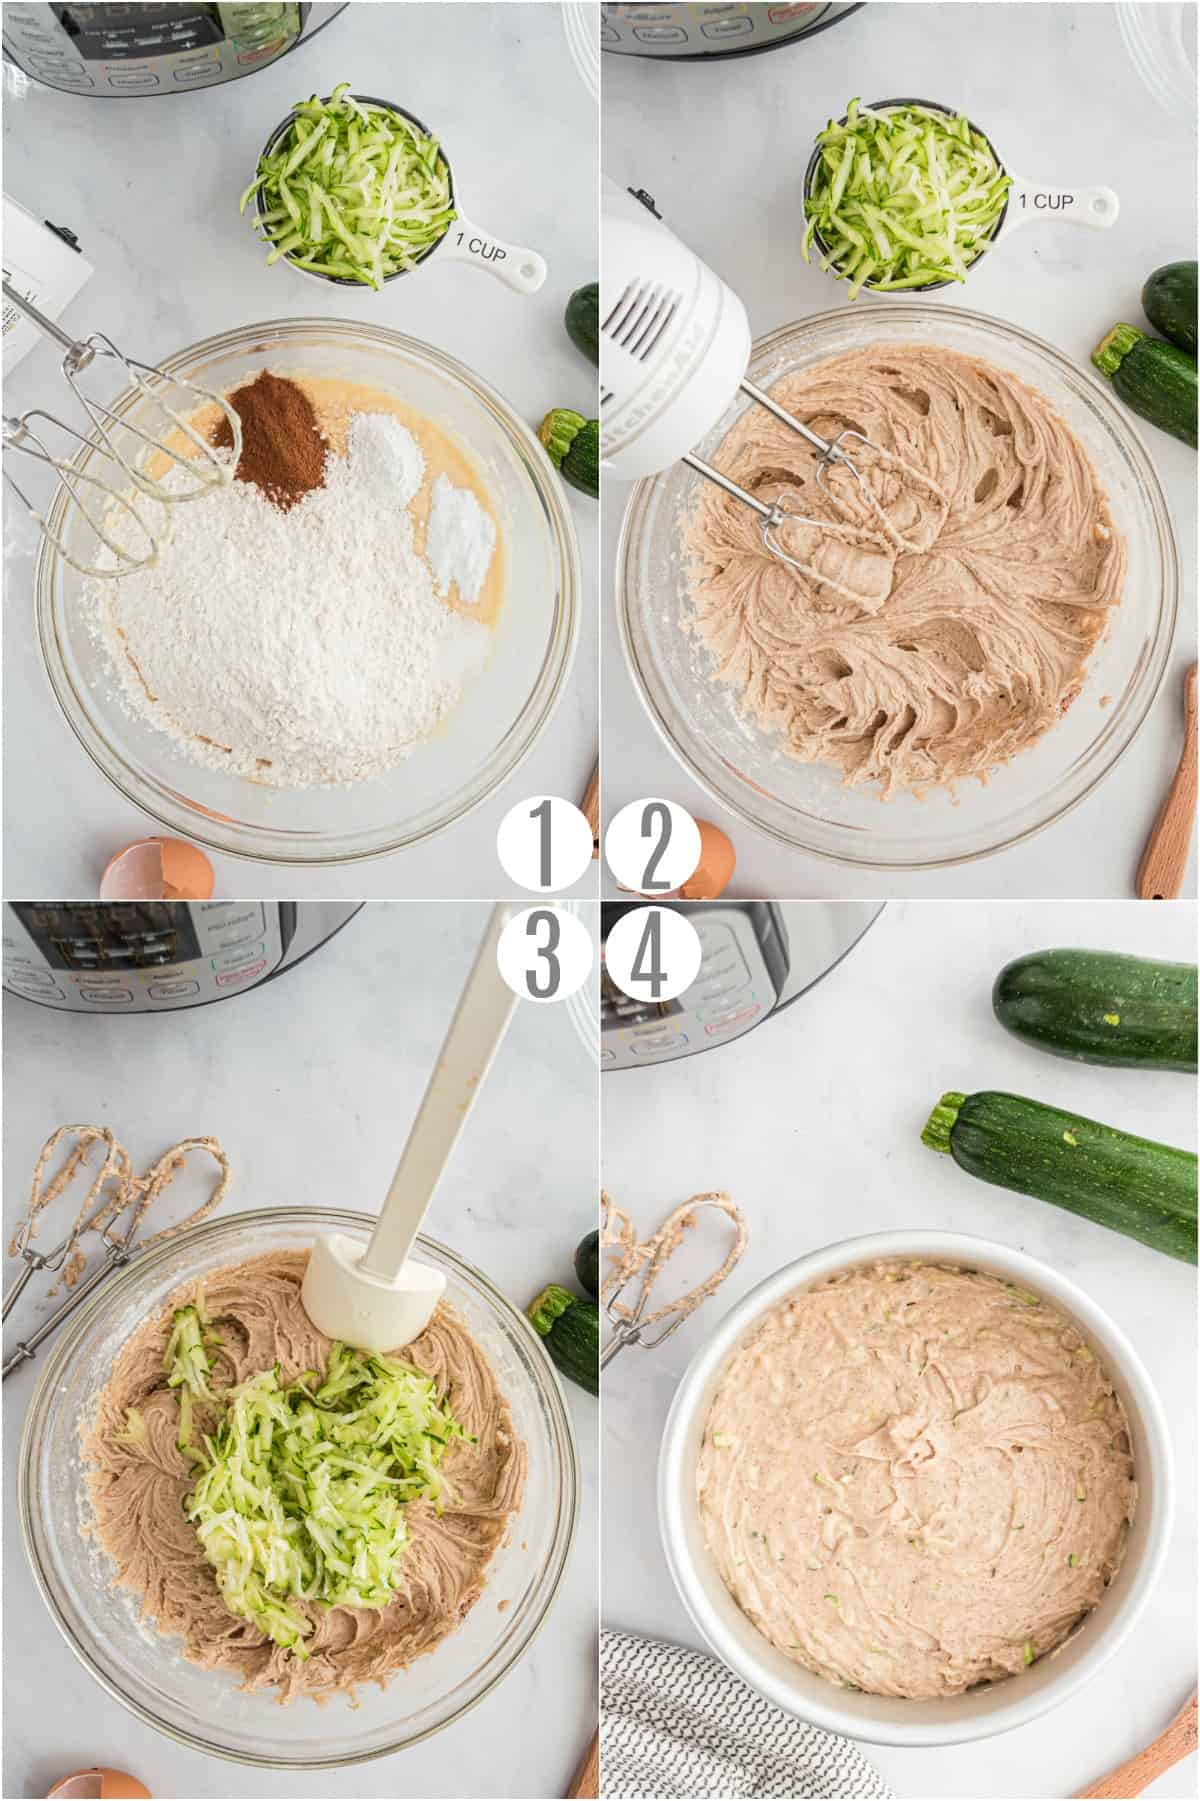 Step by step photos showing how to make zucchini bread in the pressure cooker.